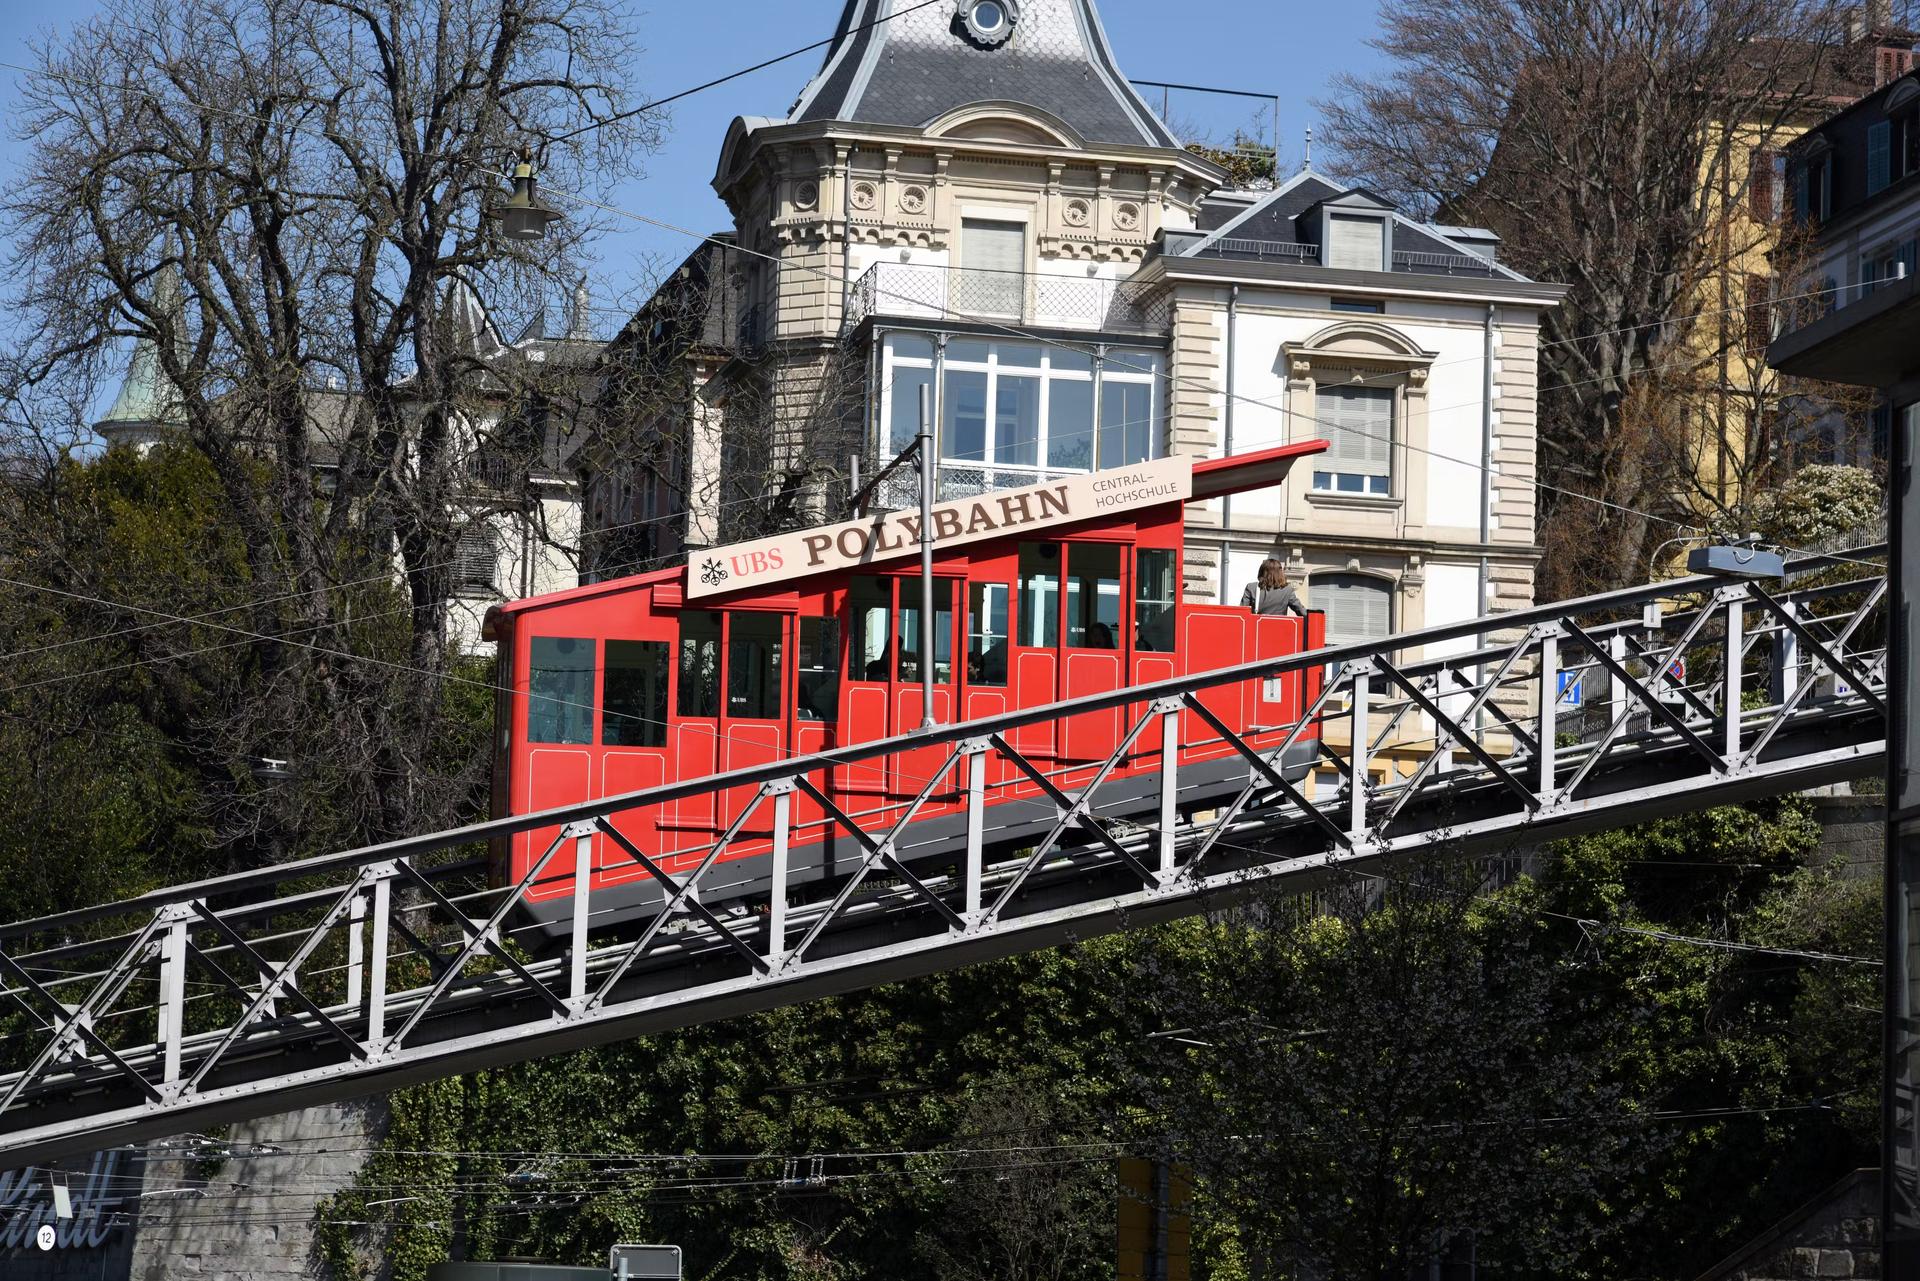 The small and famous Polybahn connects Zurich Central with the University Zurich. The Polybahn was built in 1886 and the travel distance takes only 176 meters.